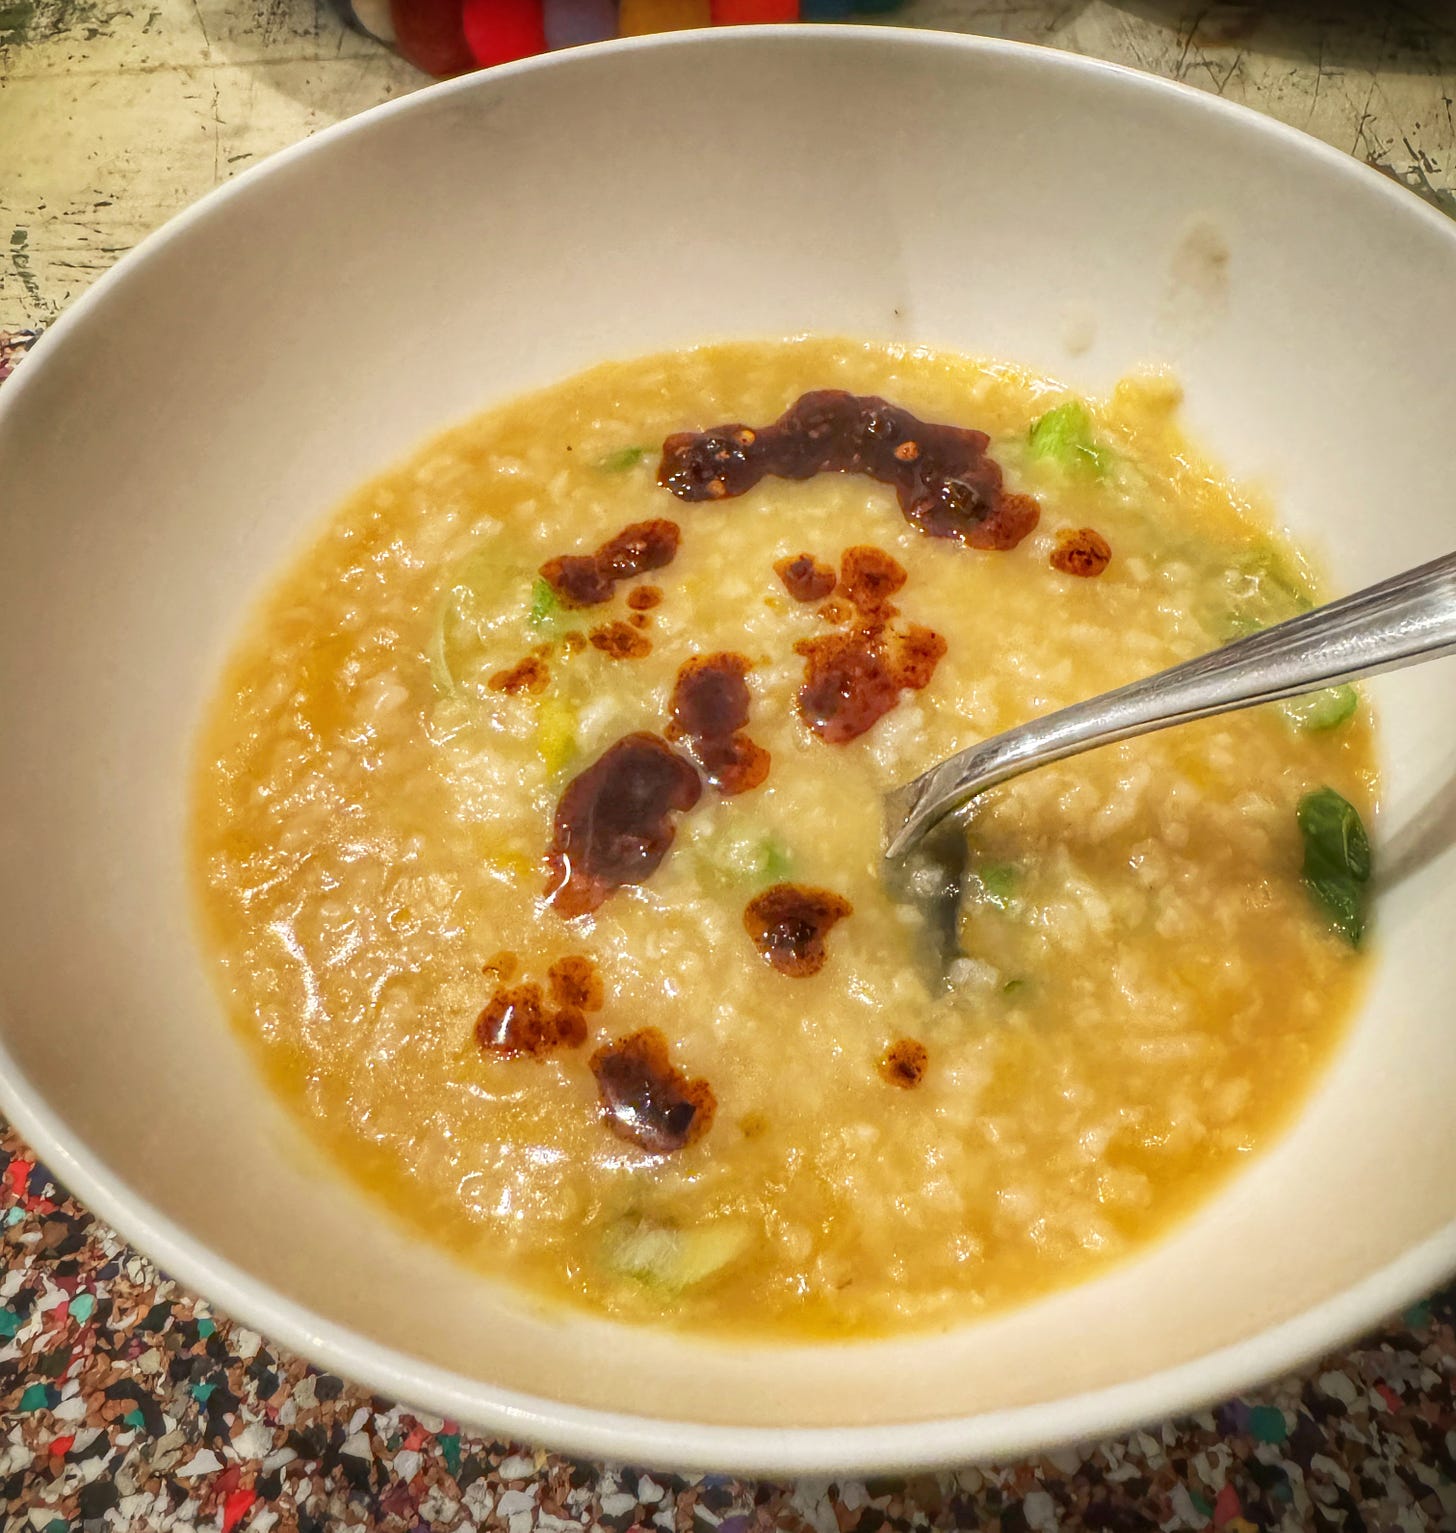 A bowl of butternut squash congee, topped with sliced green onion and a splash of chili crisp